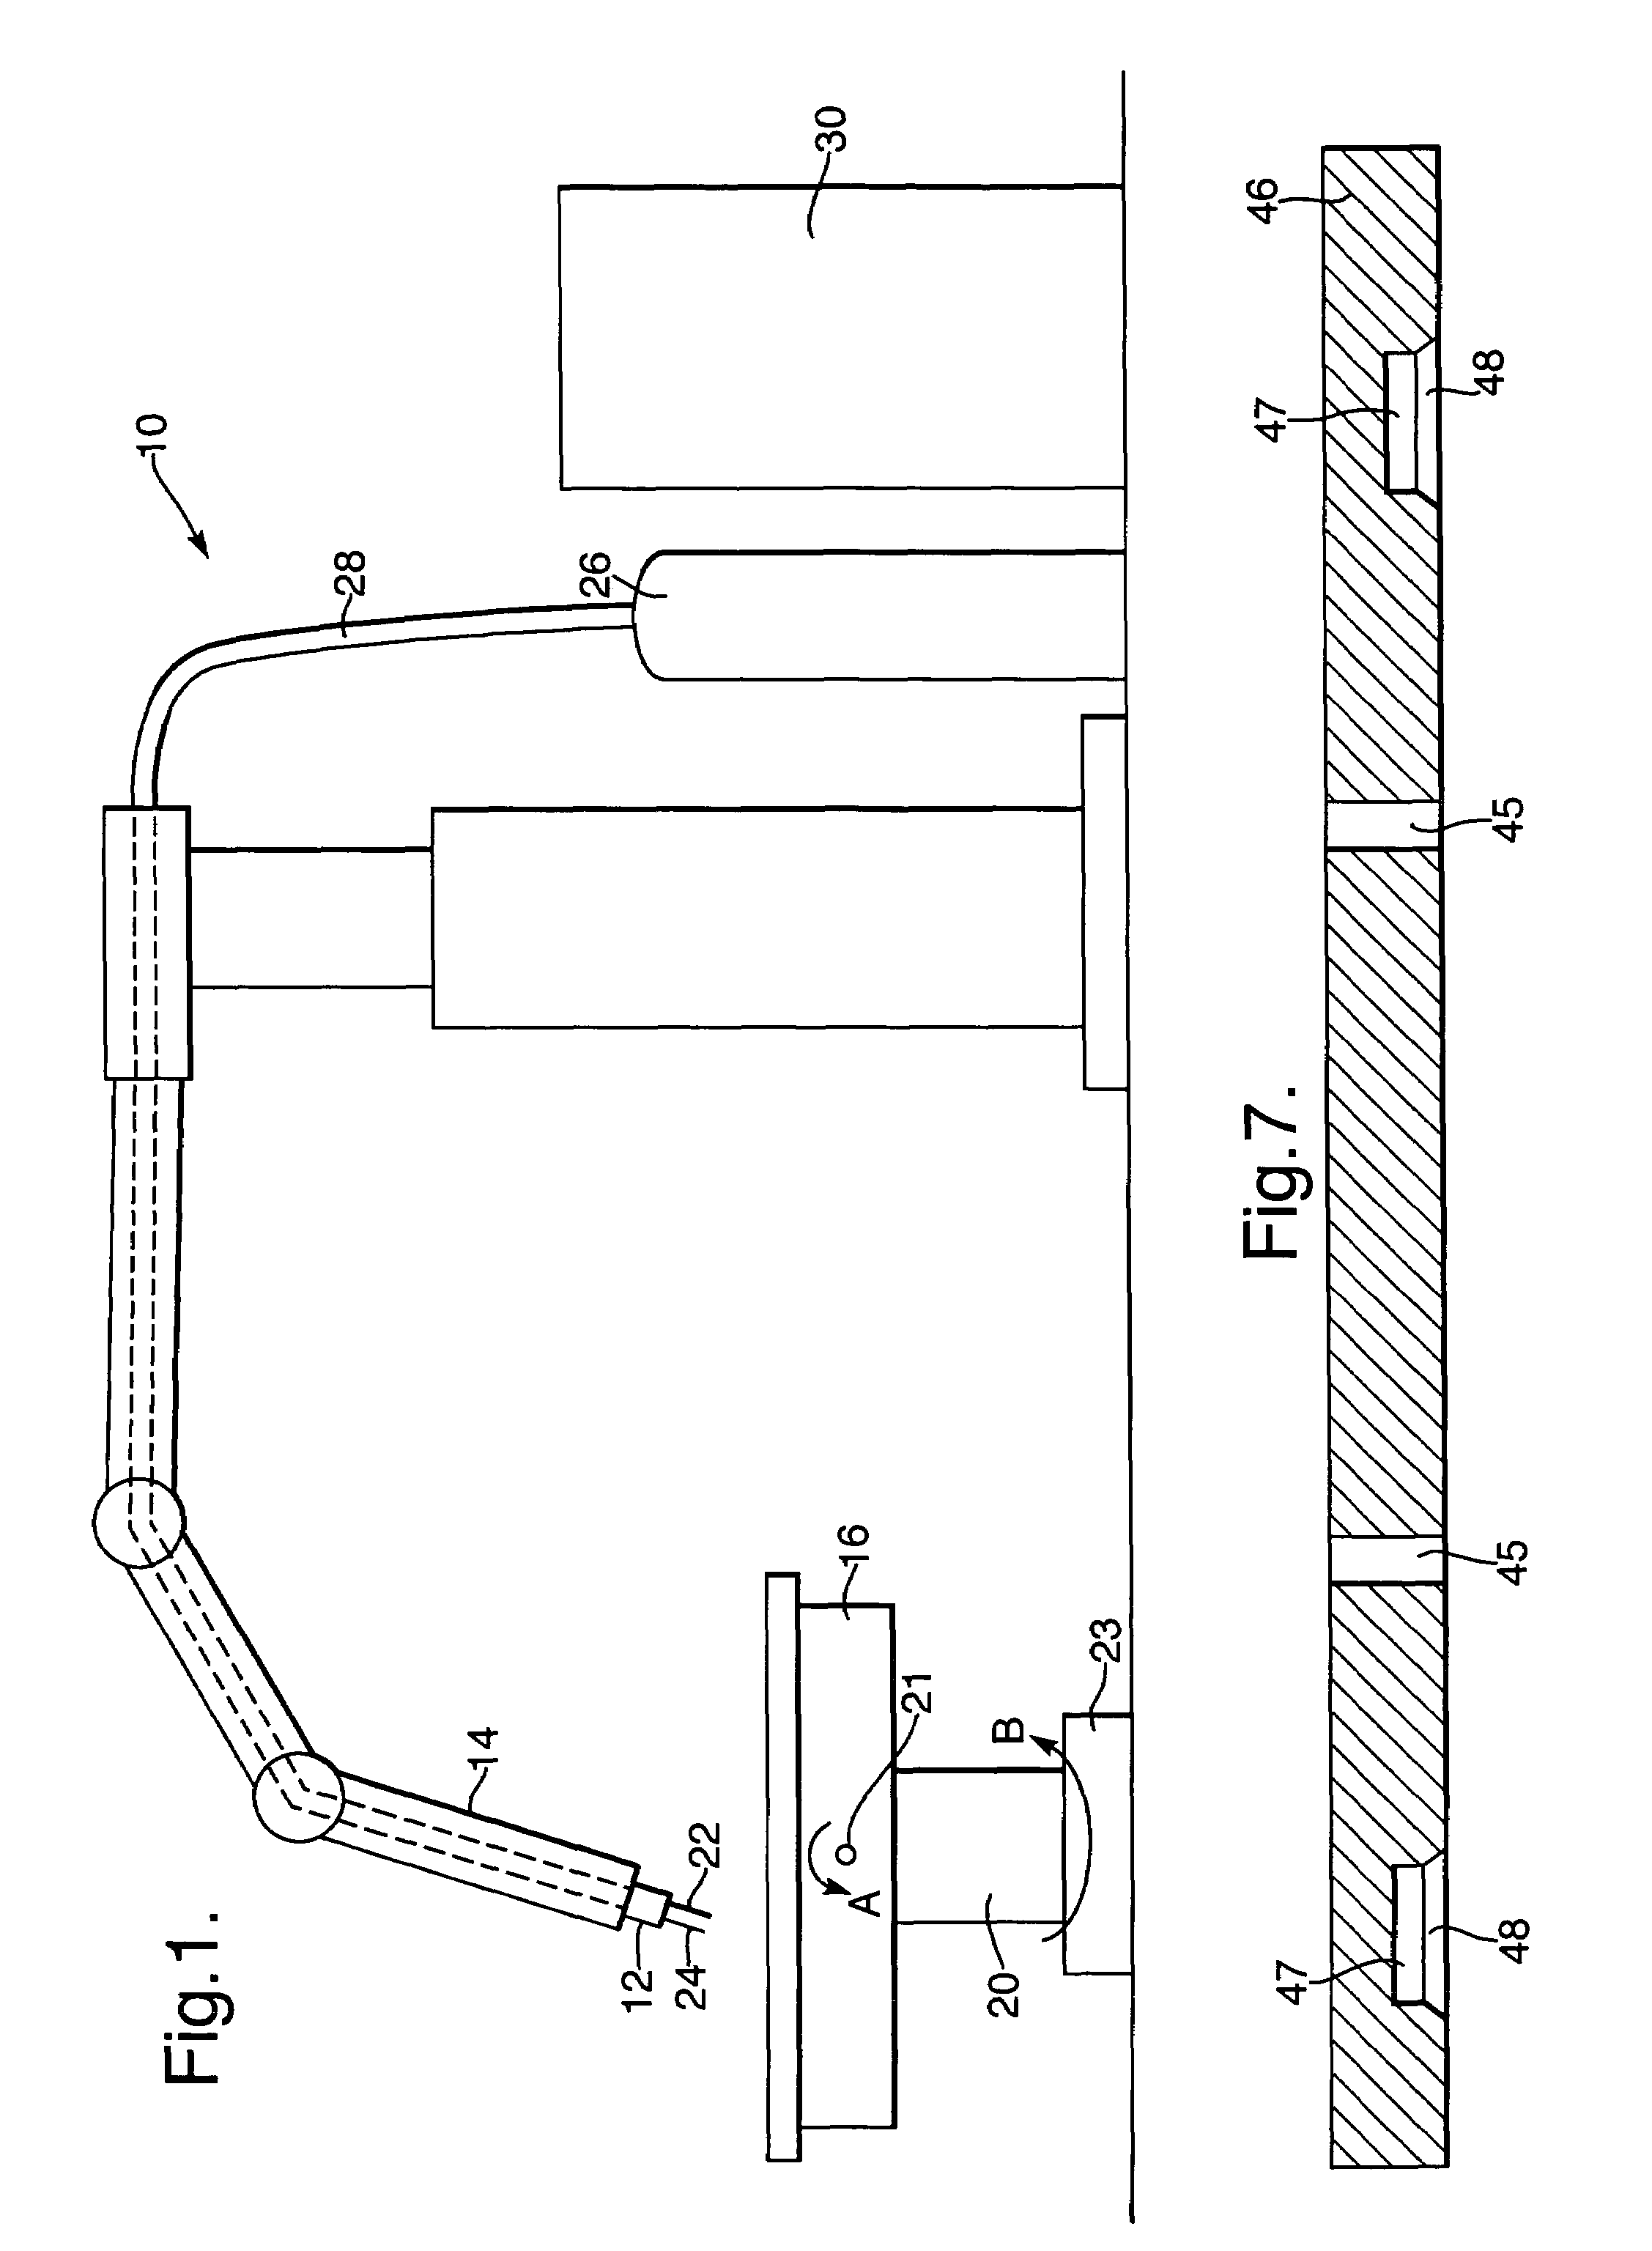 Method and apparatus for heat-treating an article and a fixture for use in the same